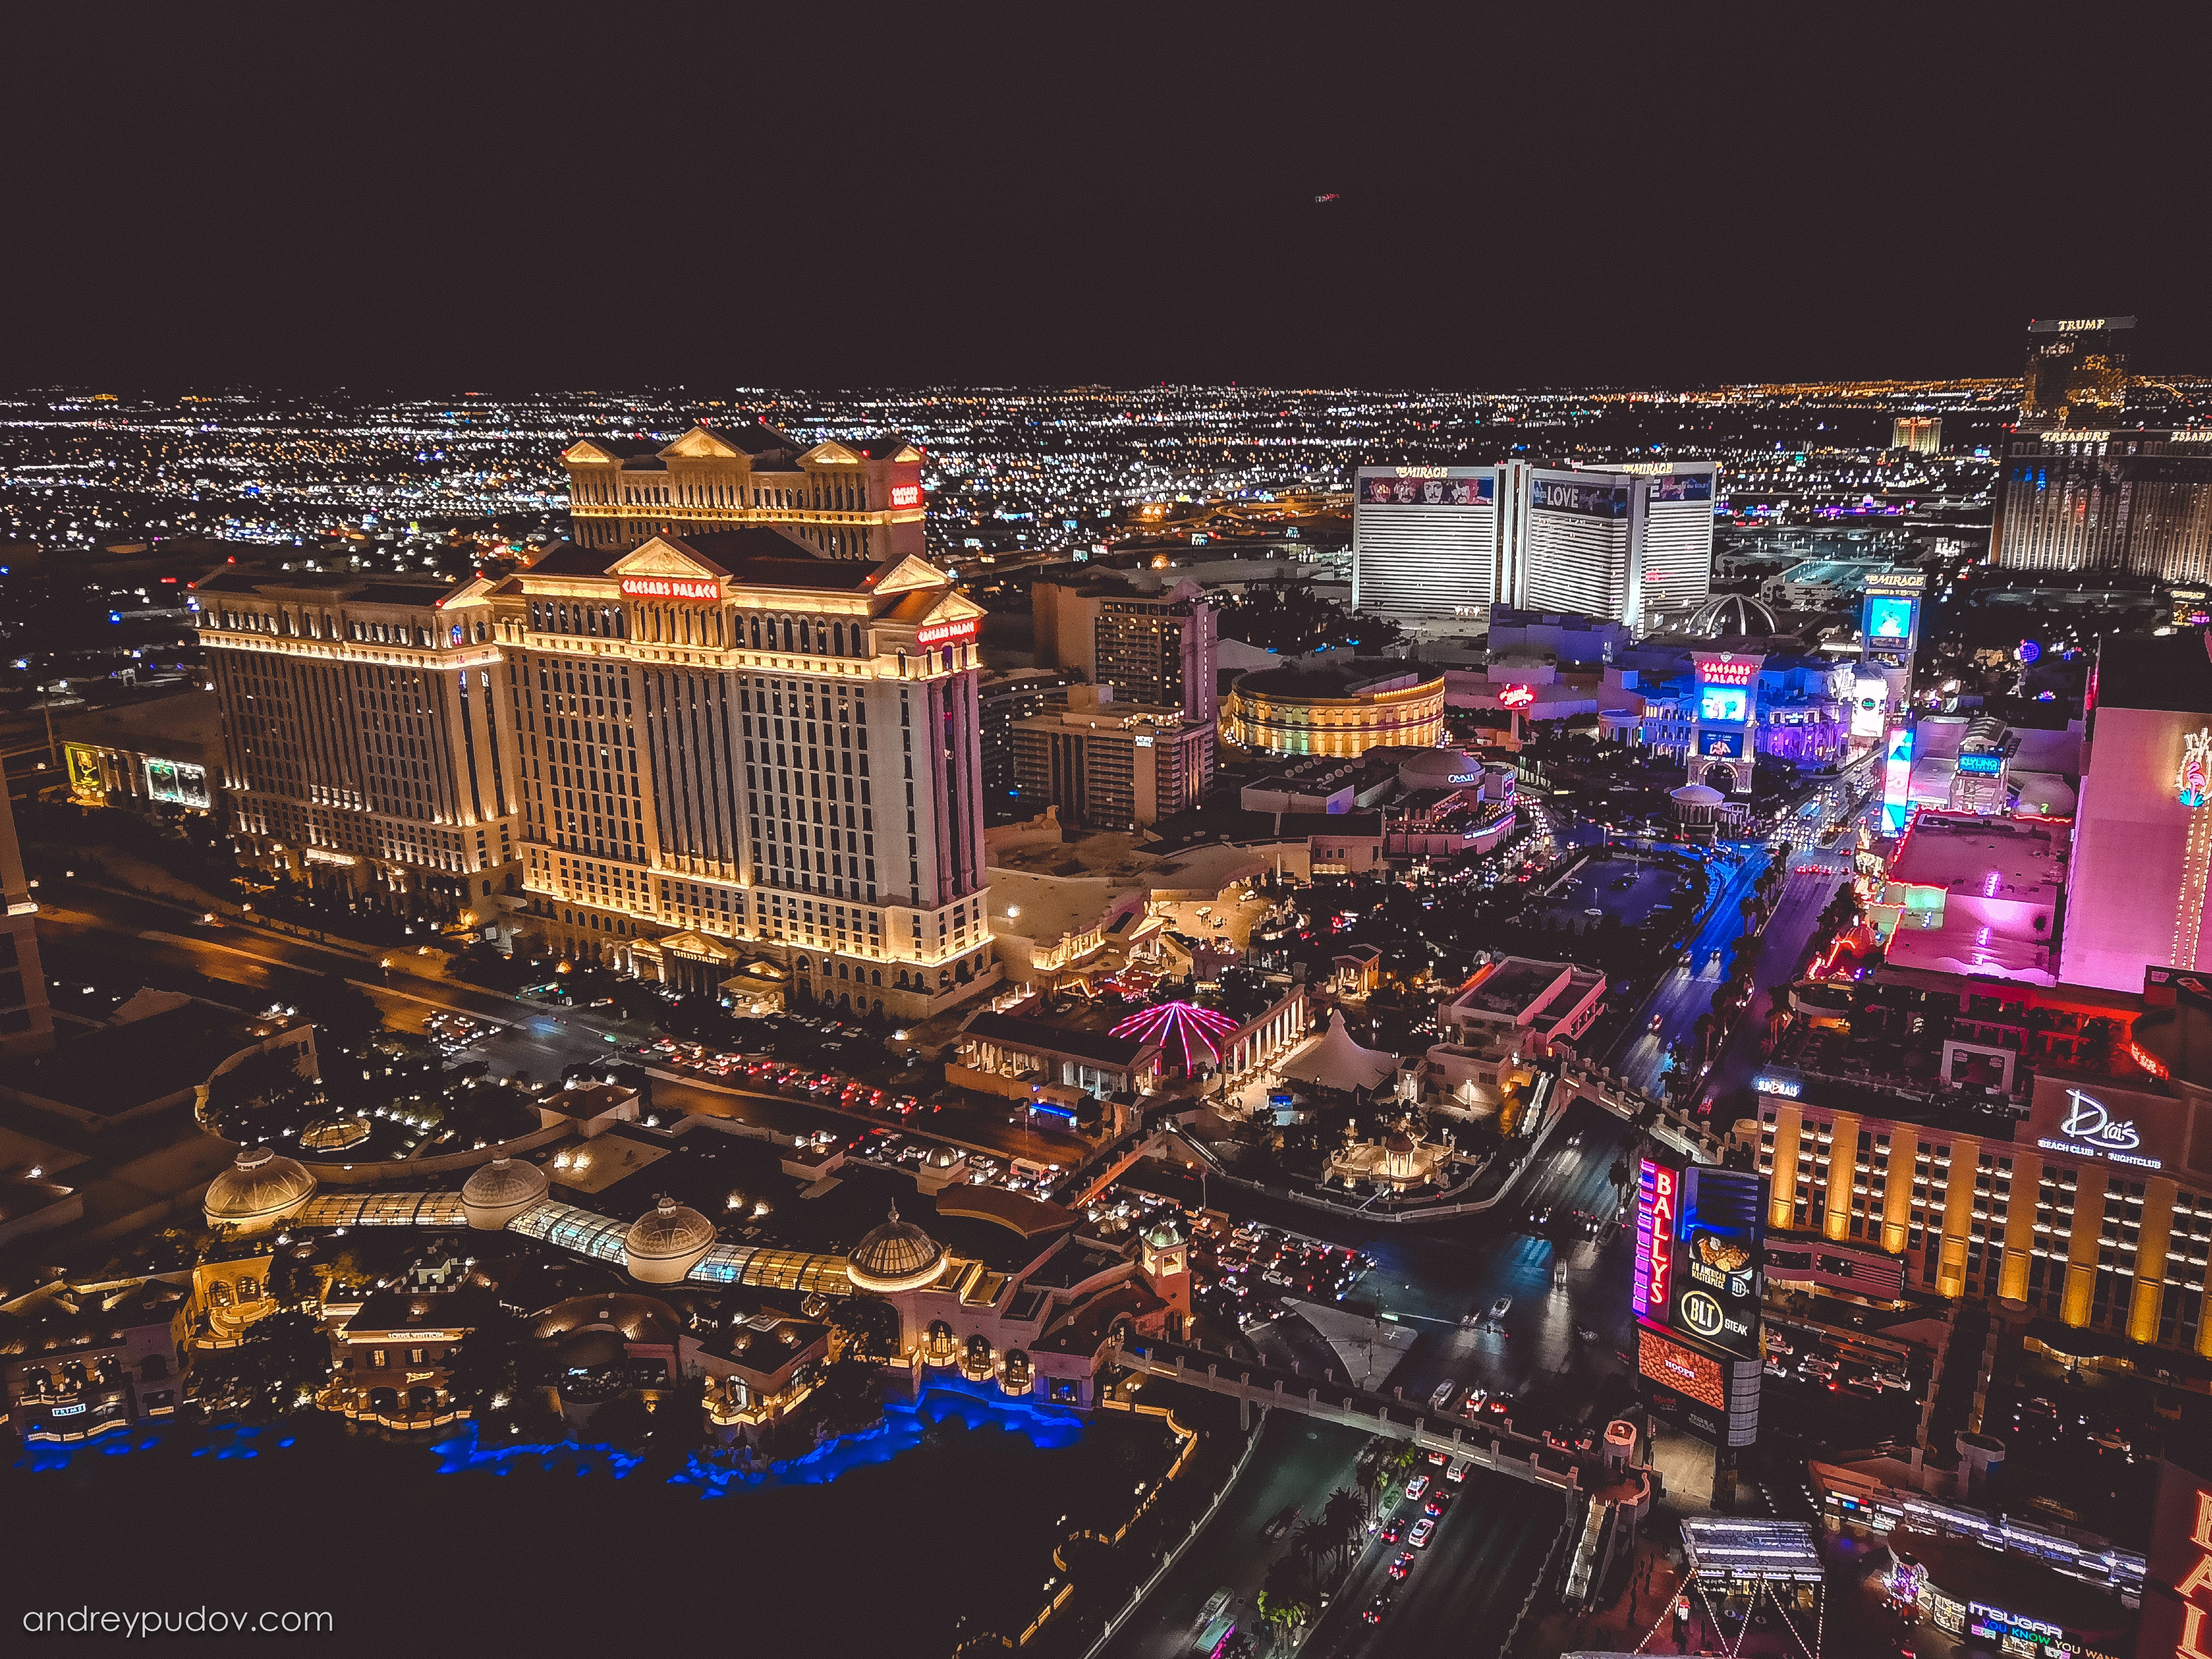 Today, Las Vegas annually ranks as one of the world's most visited tourist destinations. The city's tolerance for numerous forms of adult entertainment earned it the title of "Sin City", and has made Las Vegas a popular setting for literature, films, television programs, and music videos.